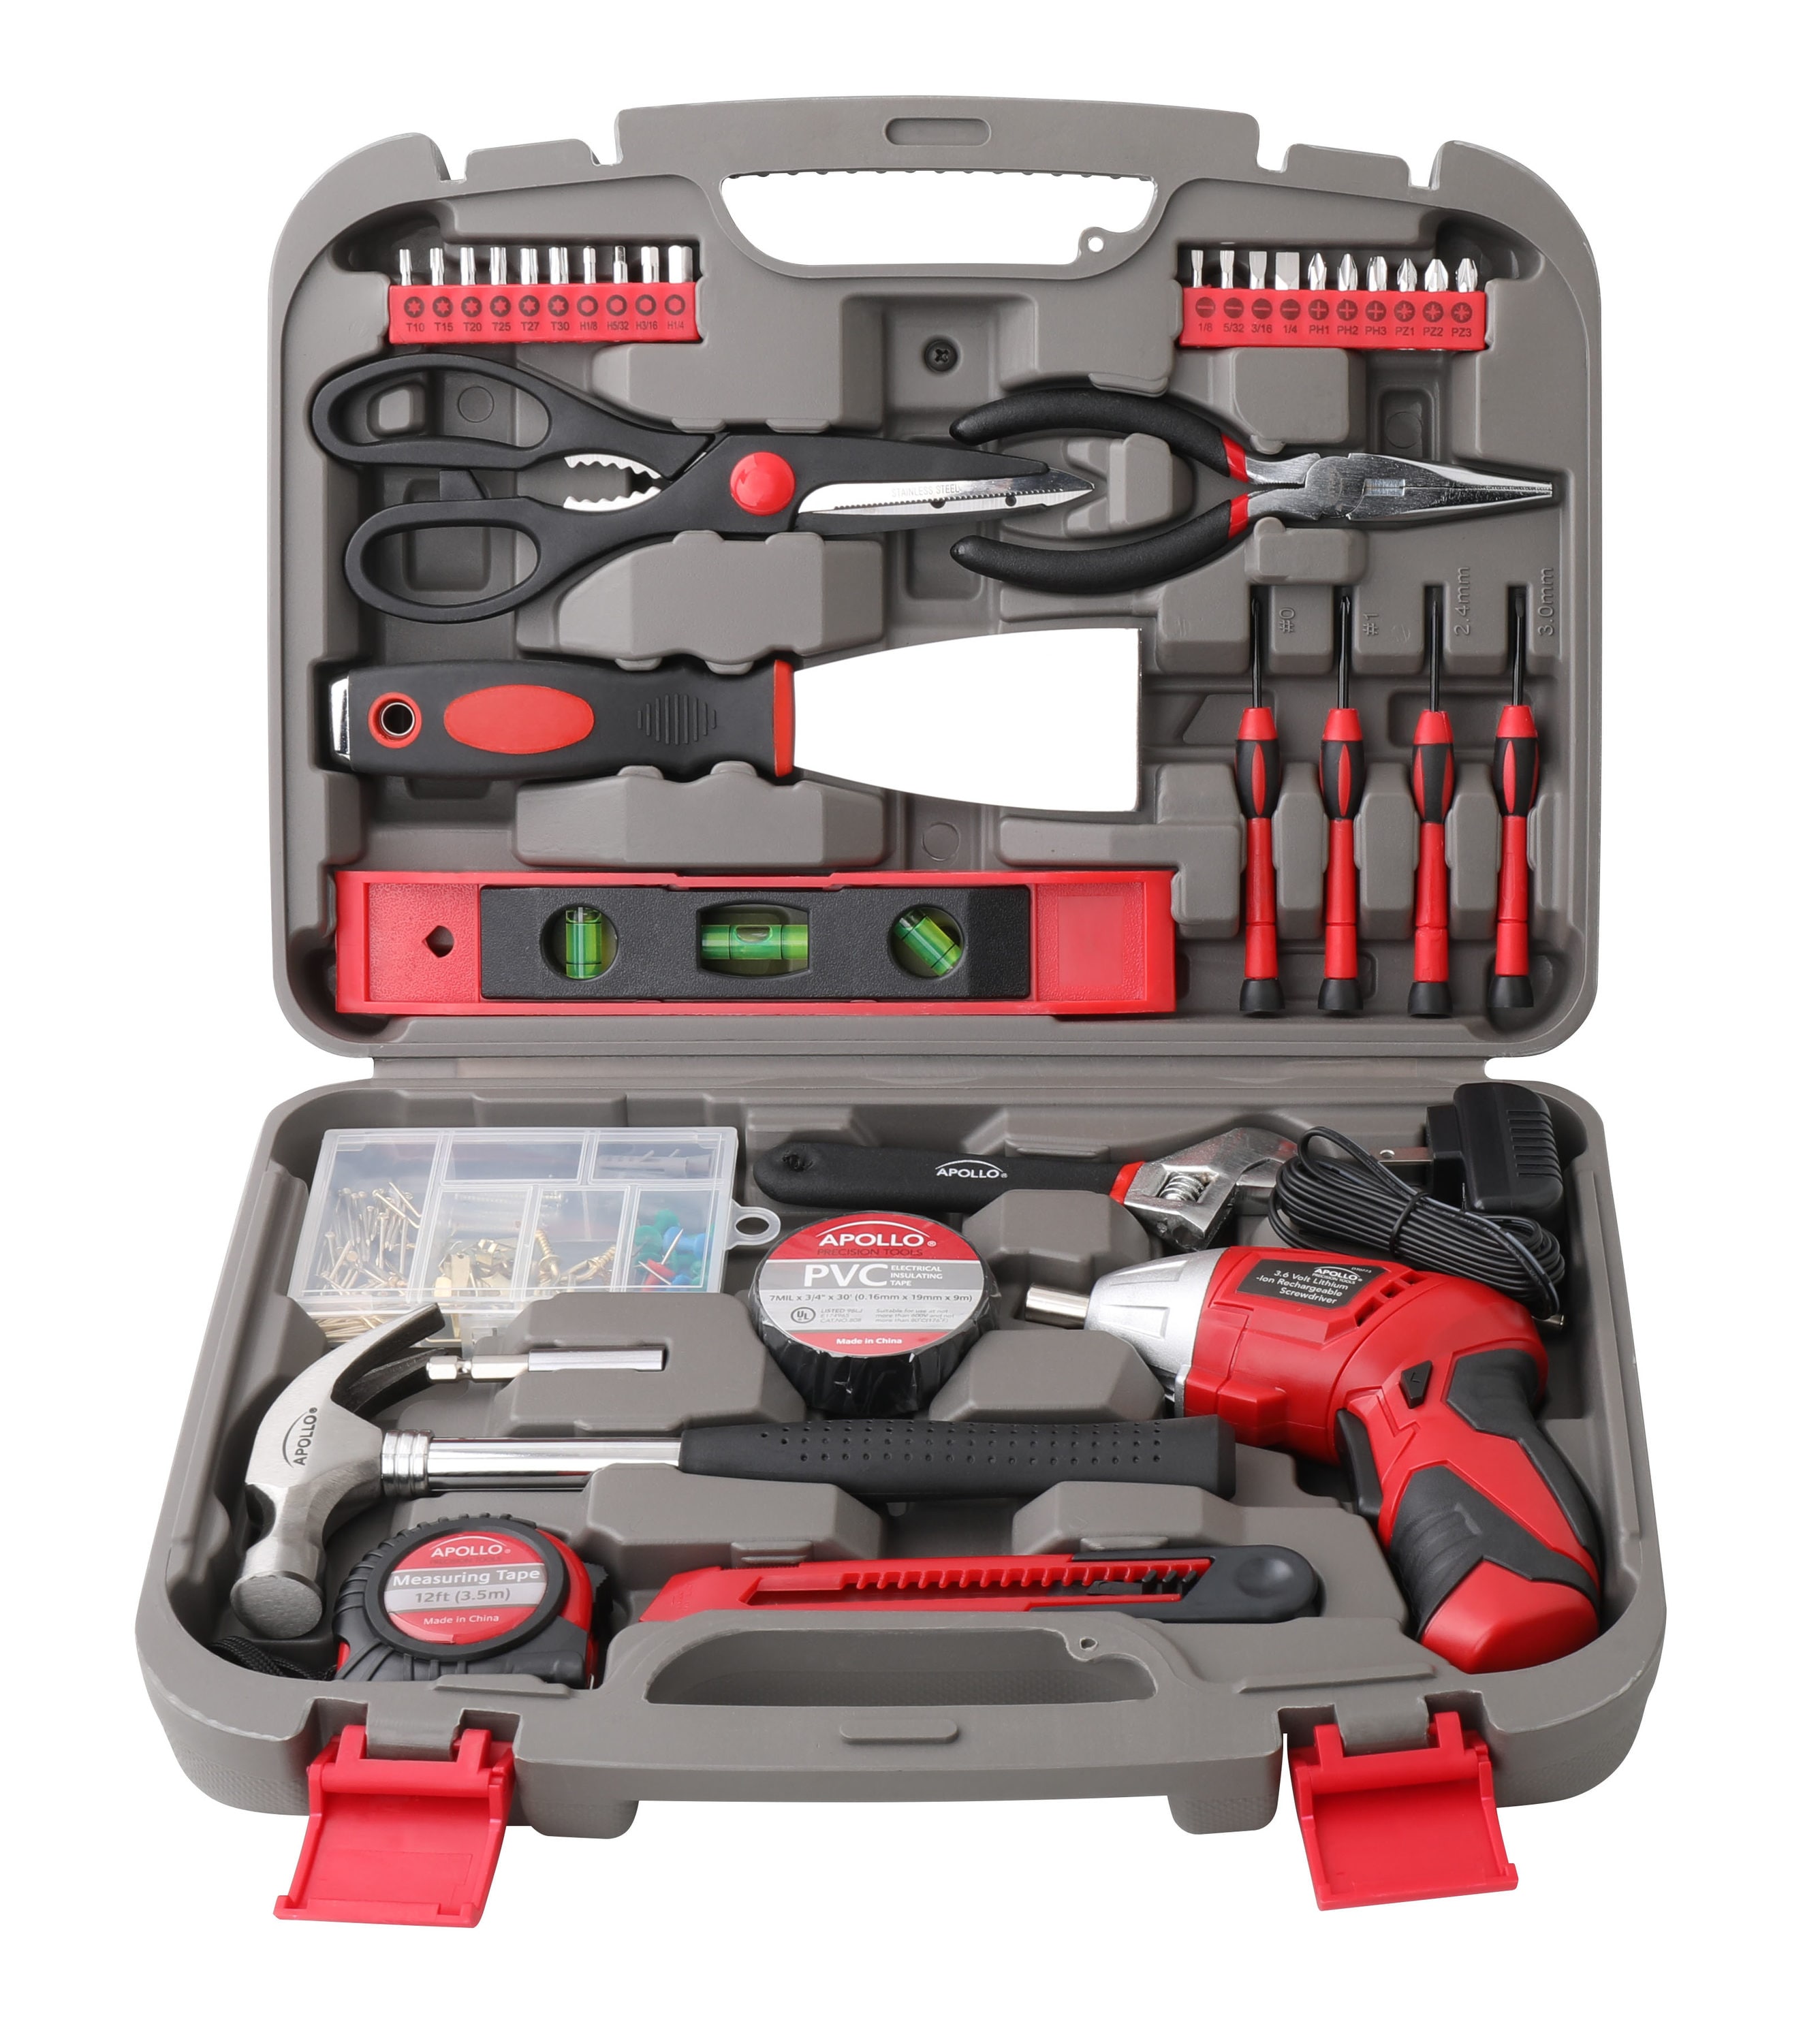  BLACK+DECKER BCKSB29C1 20V MAX* Cordless Drill with 28-Piece  Home Project Kit in Translucent Tool Box : Tools & Home Improvement